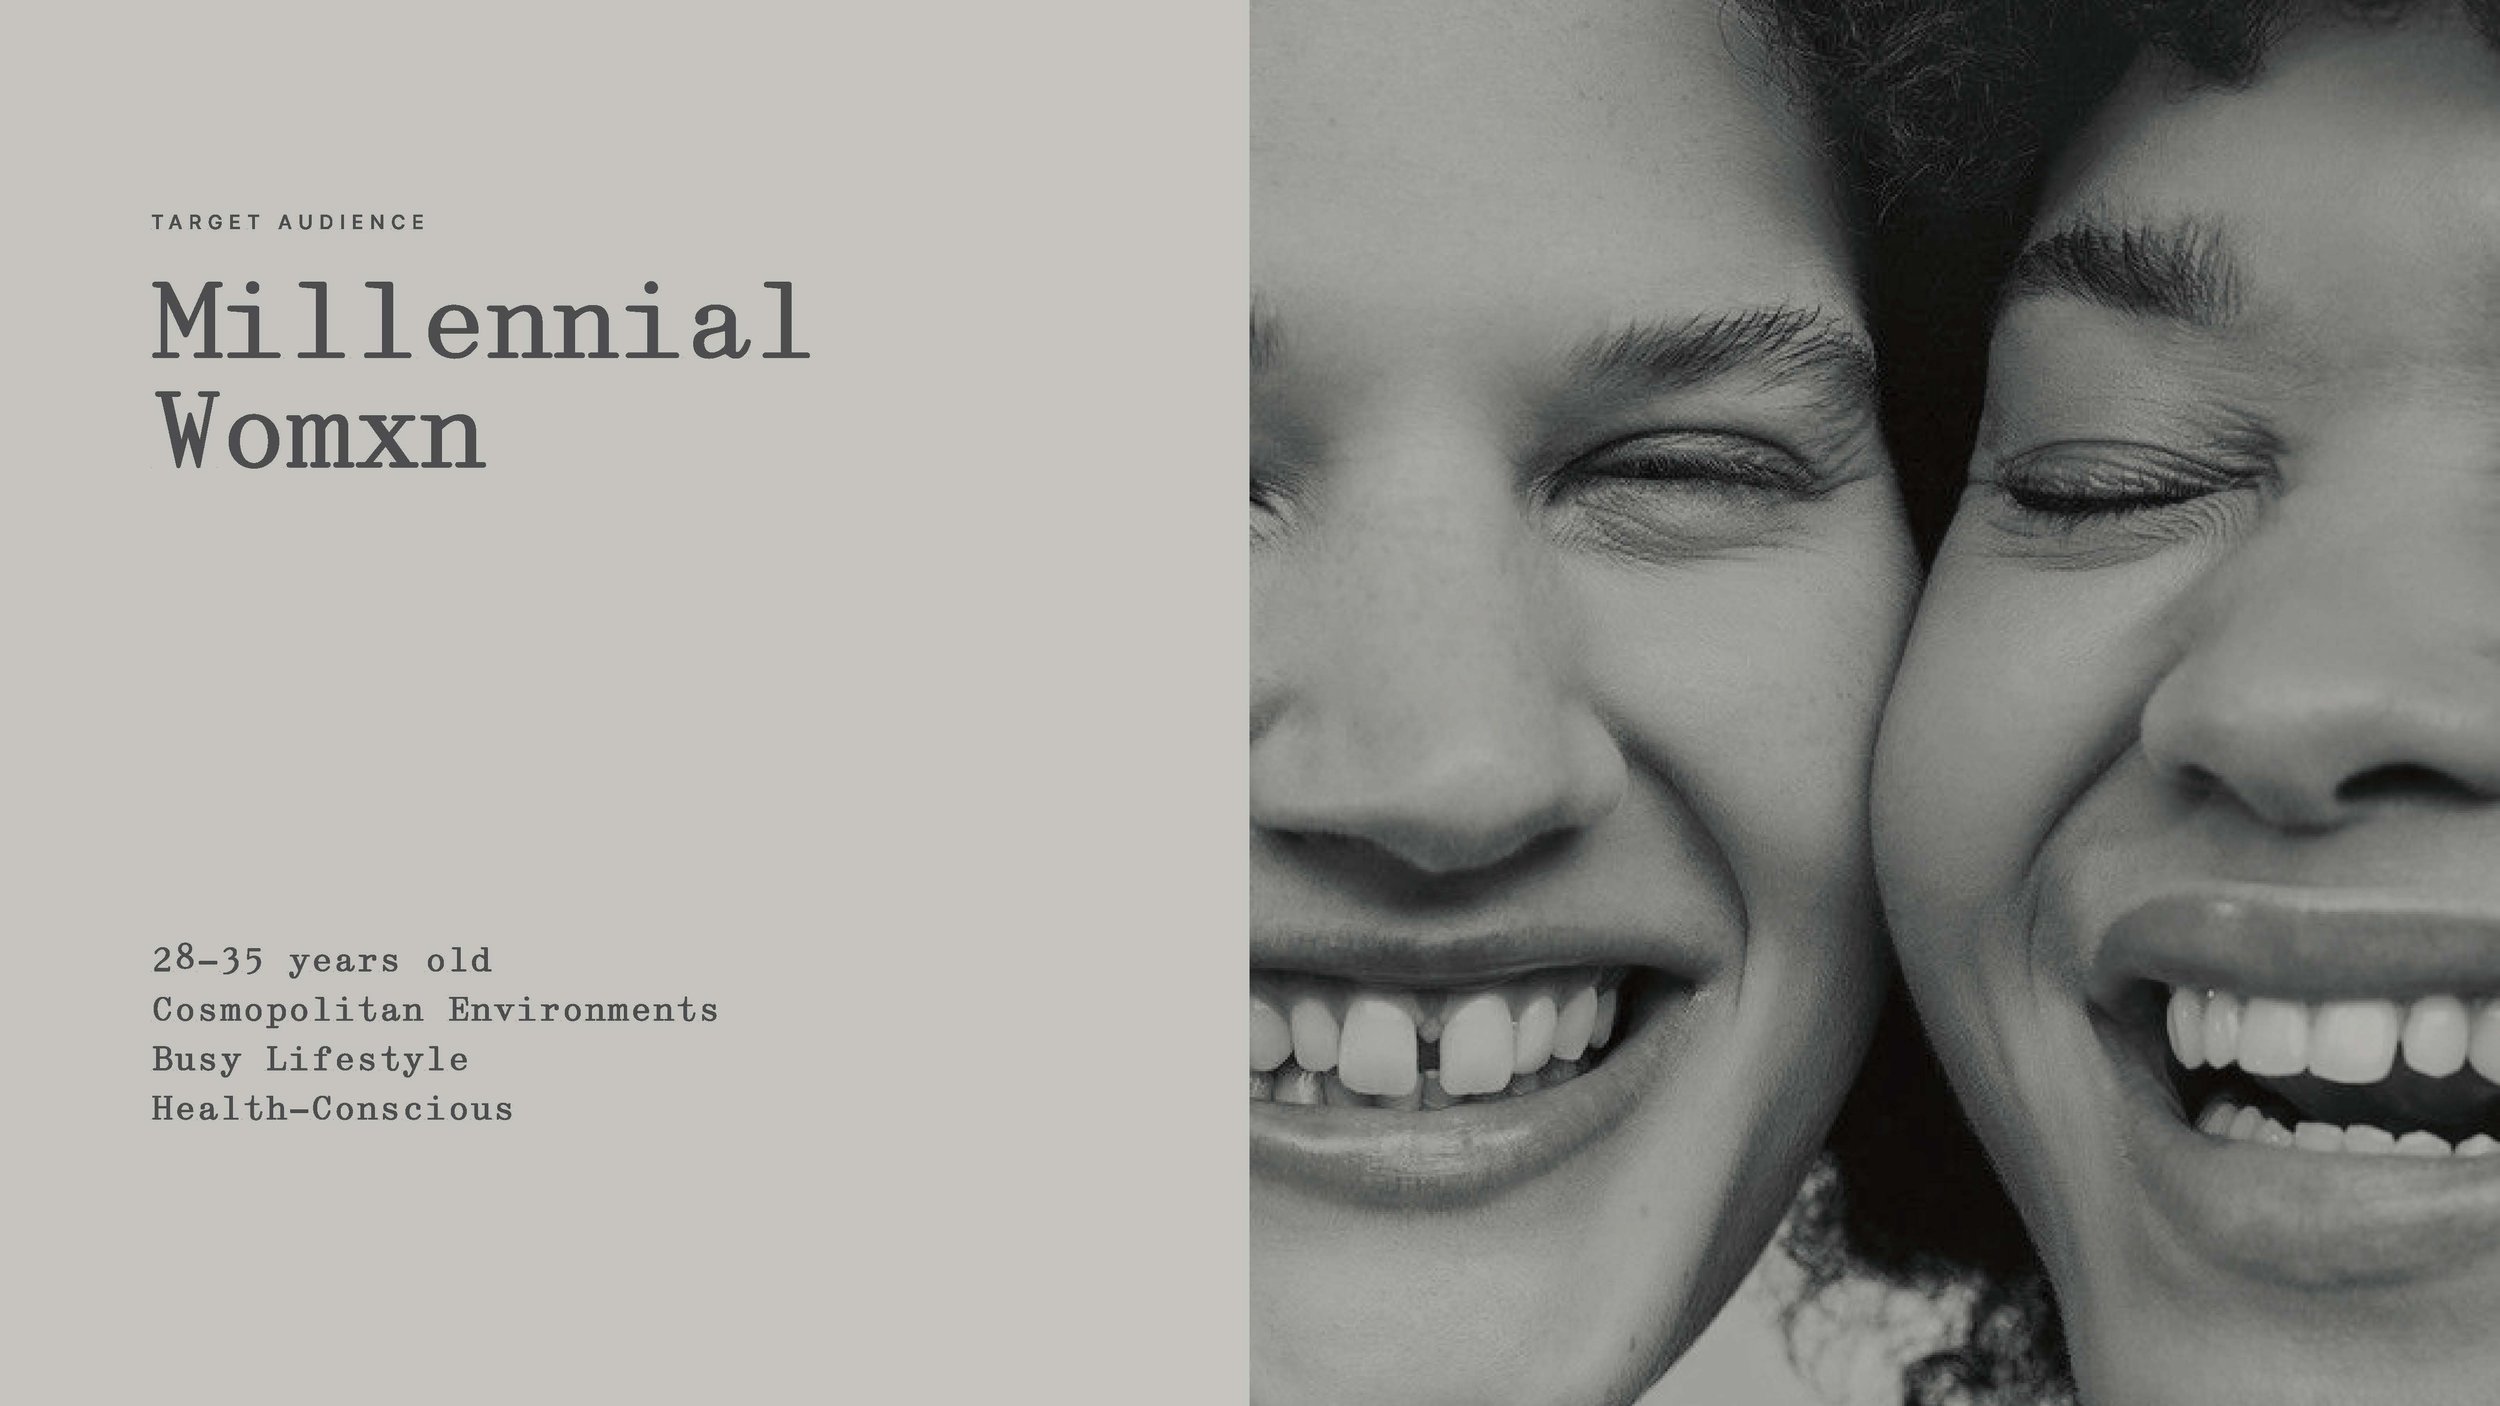  Slide about target audience: “Millennial Womxn” with image of two girls smiling 